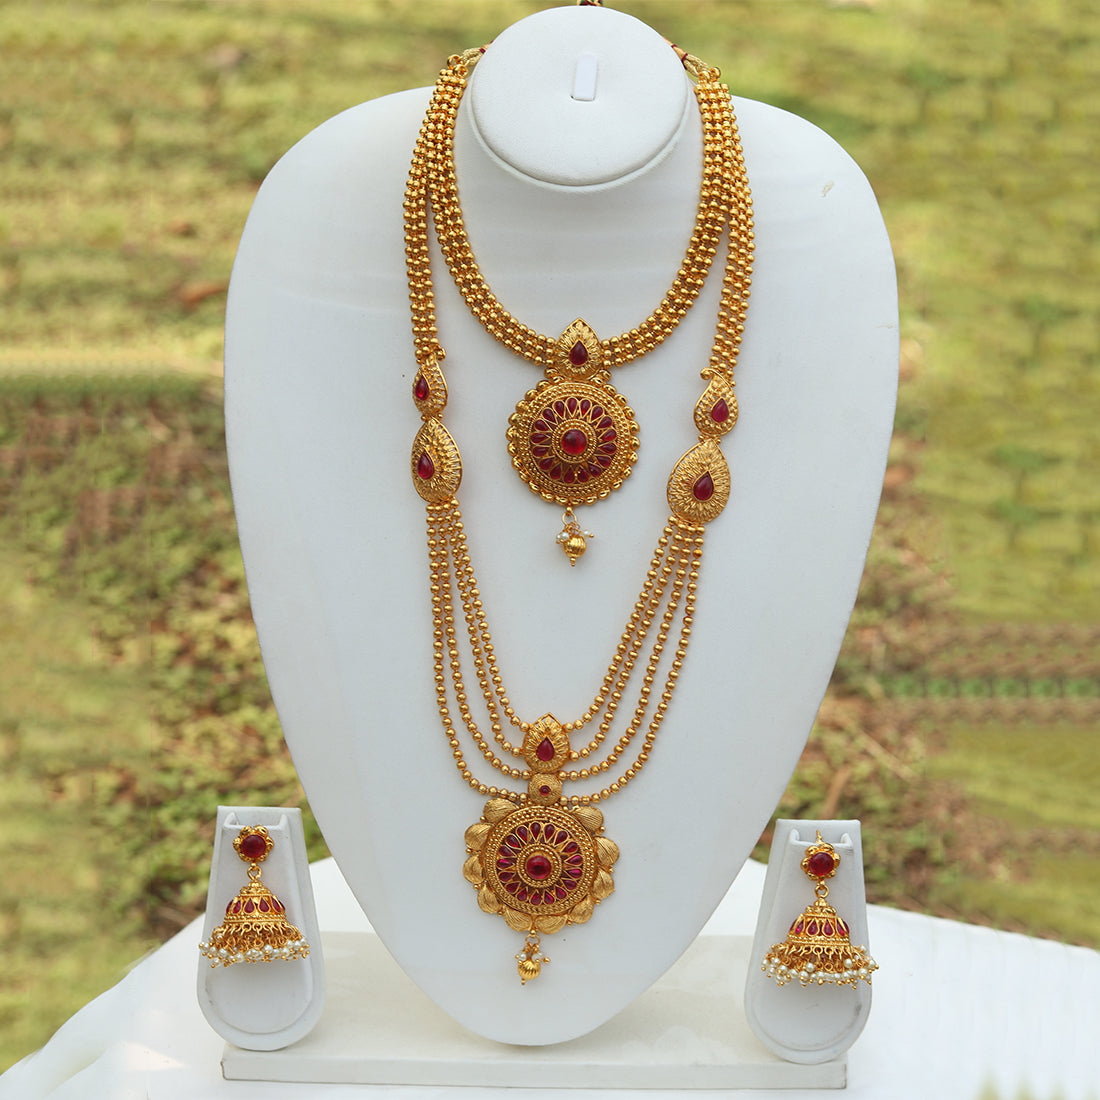 Gold Plated Long Haram Wedding Necklace with Jhumki Earring Set